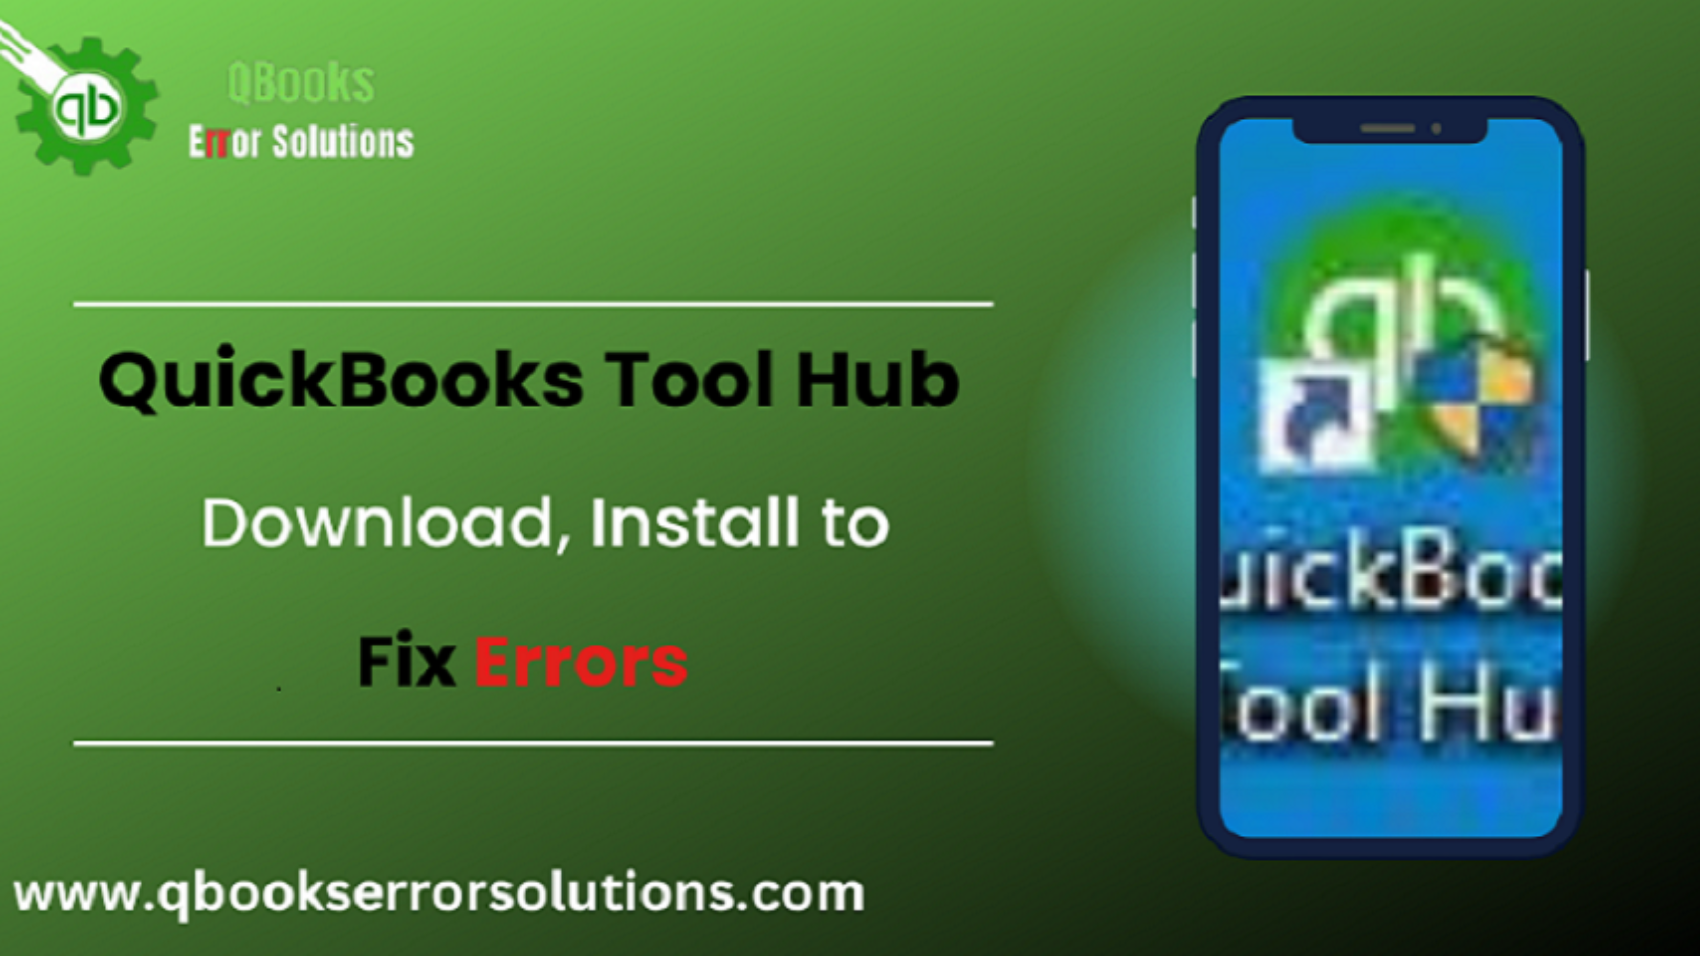 How to Download, Install QuickBooks Tool Hub